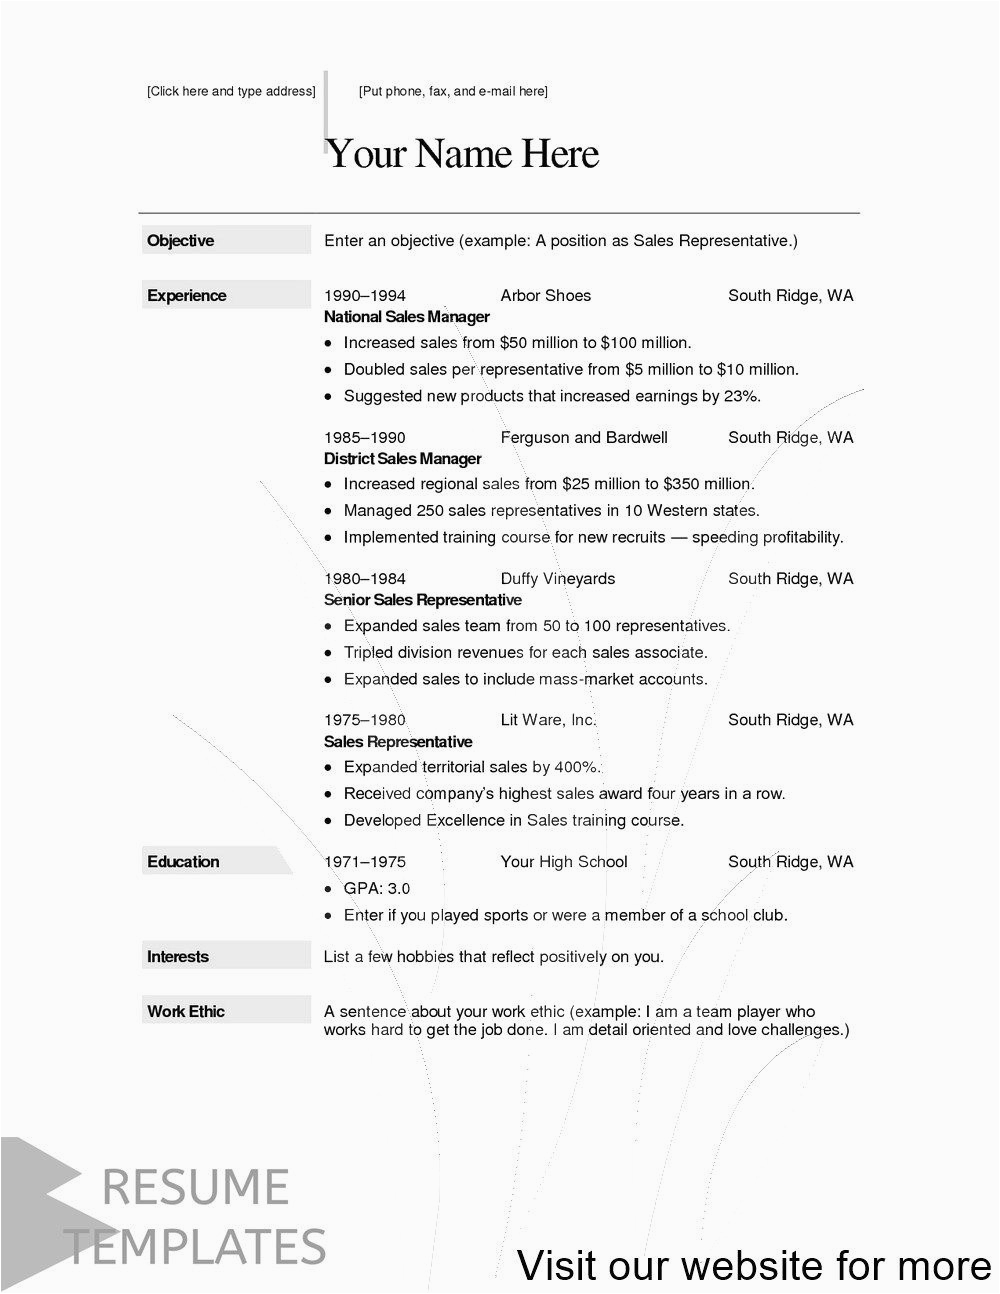 Resume Templates Free No Sign Up Free Resume Builder Online No Sign Up In 2020